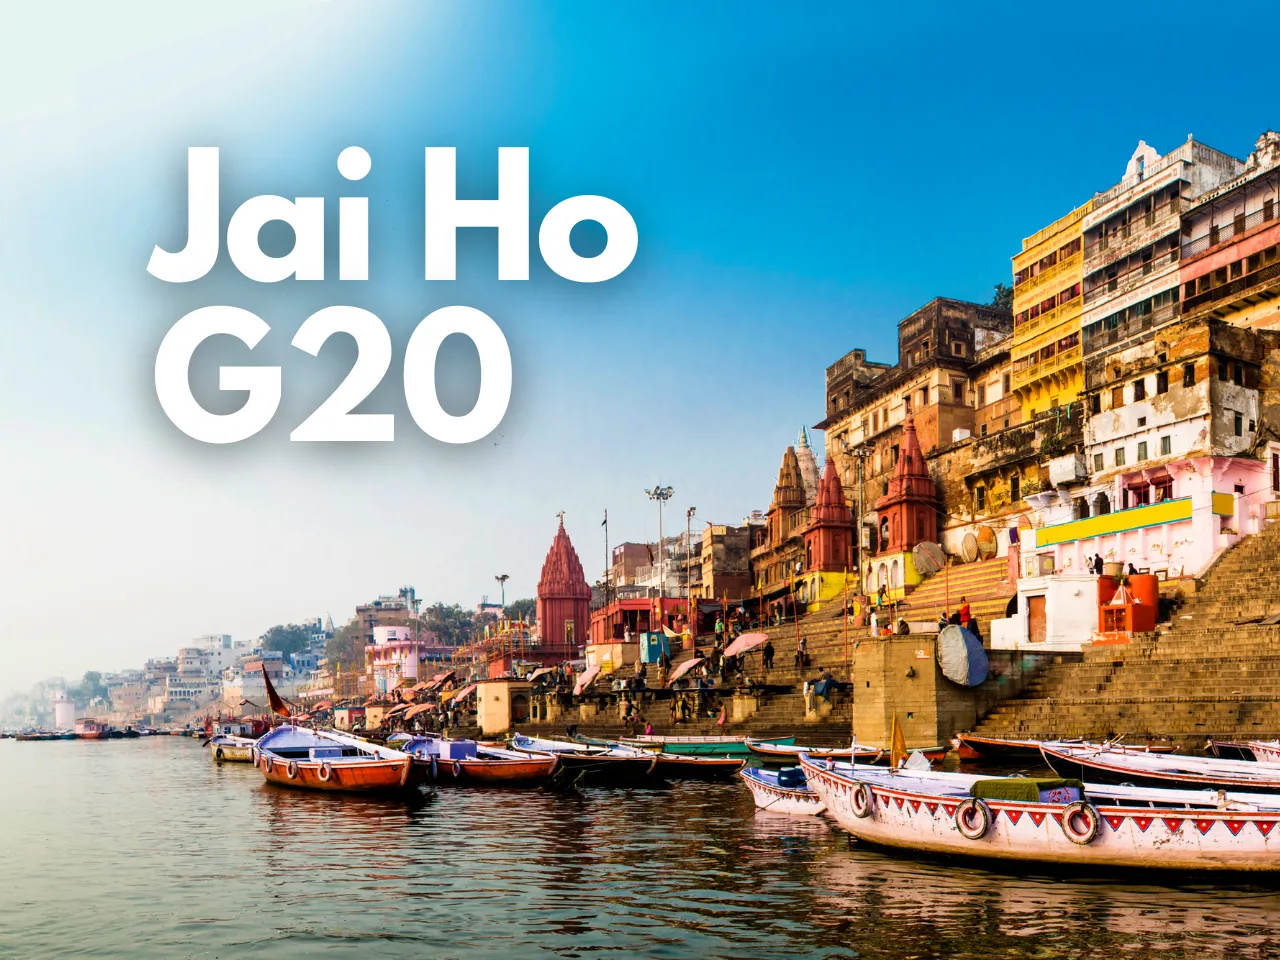 Why is the G20 Development Ministers' Varanasi Meet important?